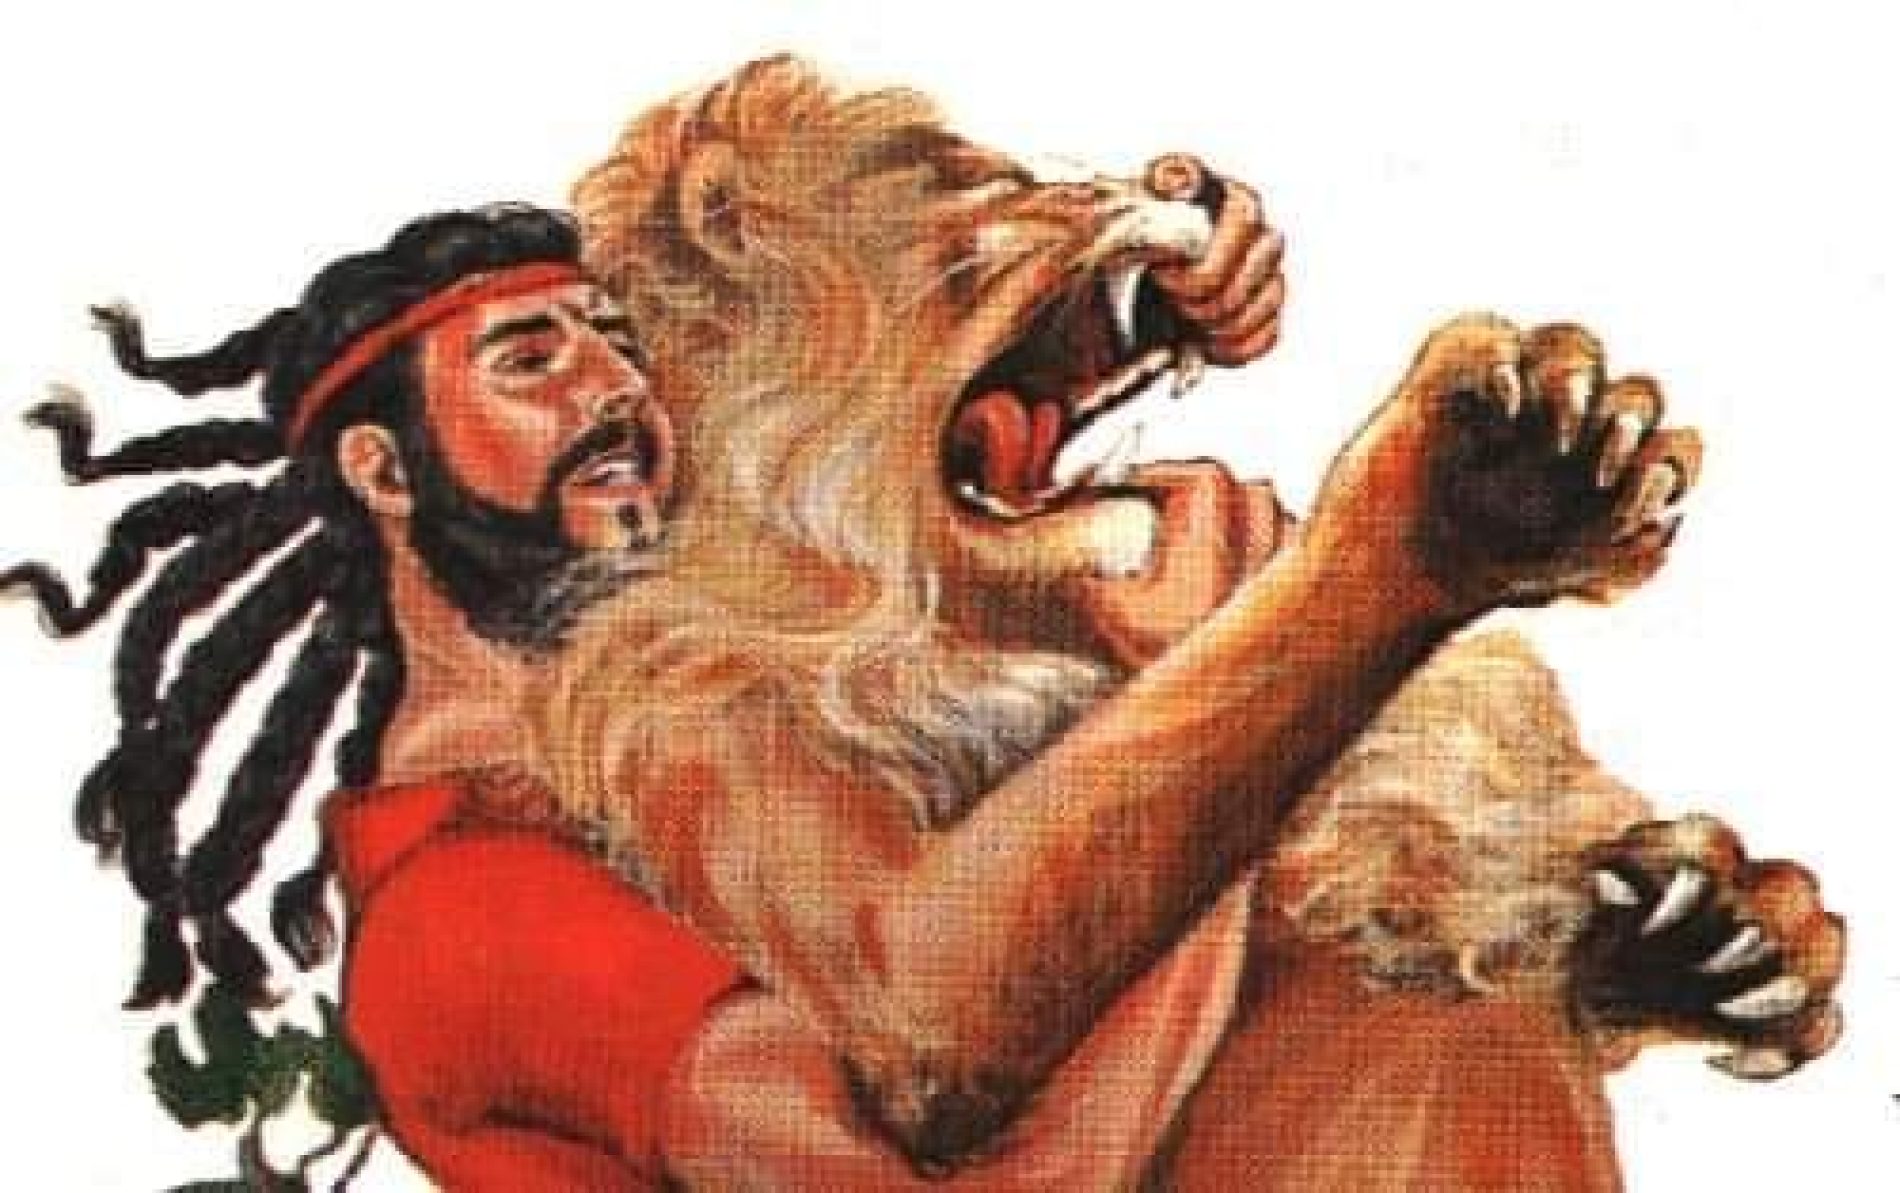 IT WAS NOT ONLY SEX THAT DESTROYED SAMSON…